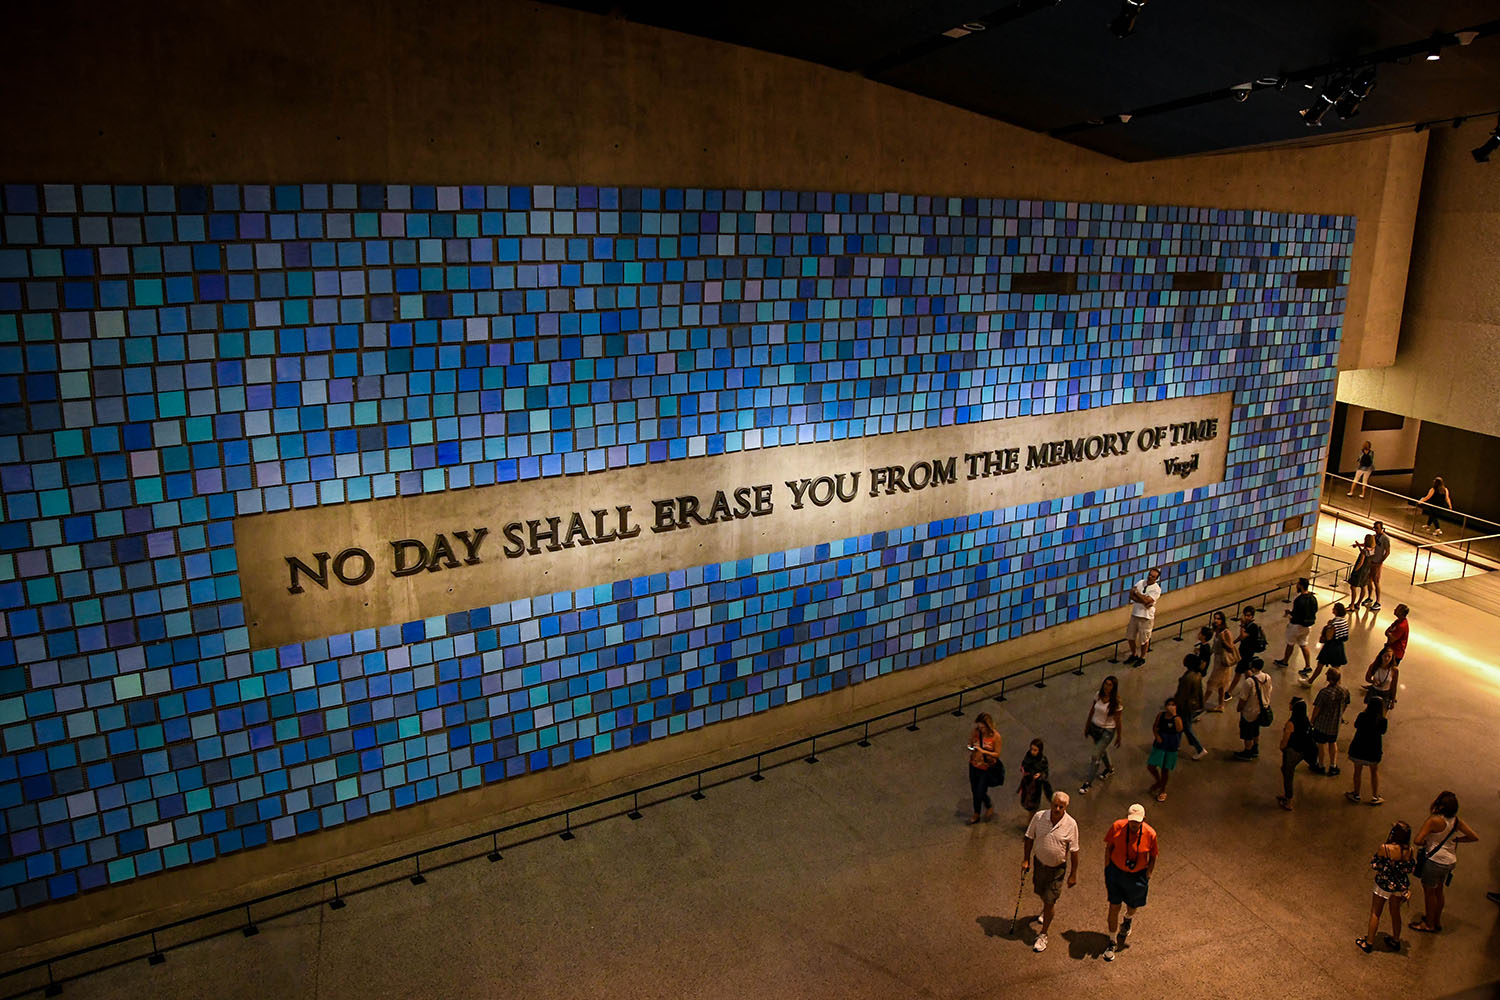 Things to Do in New York City 9/11 Memorial and Museum